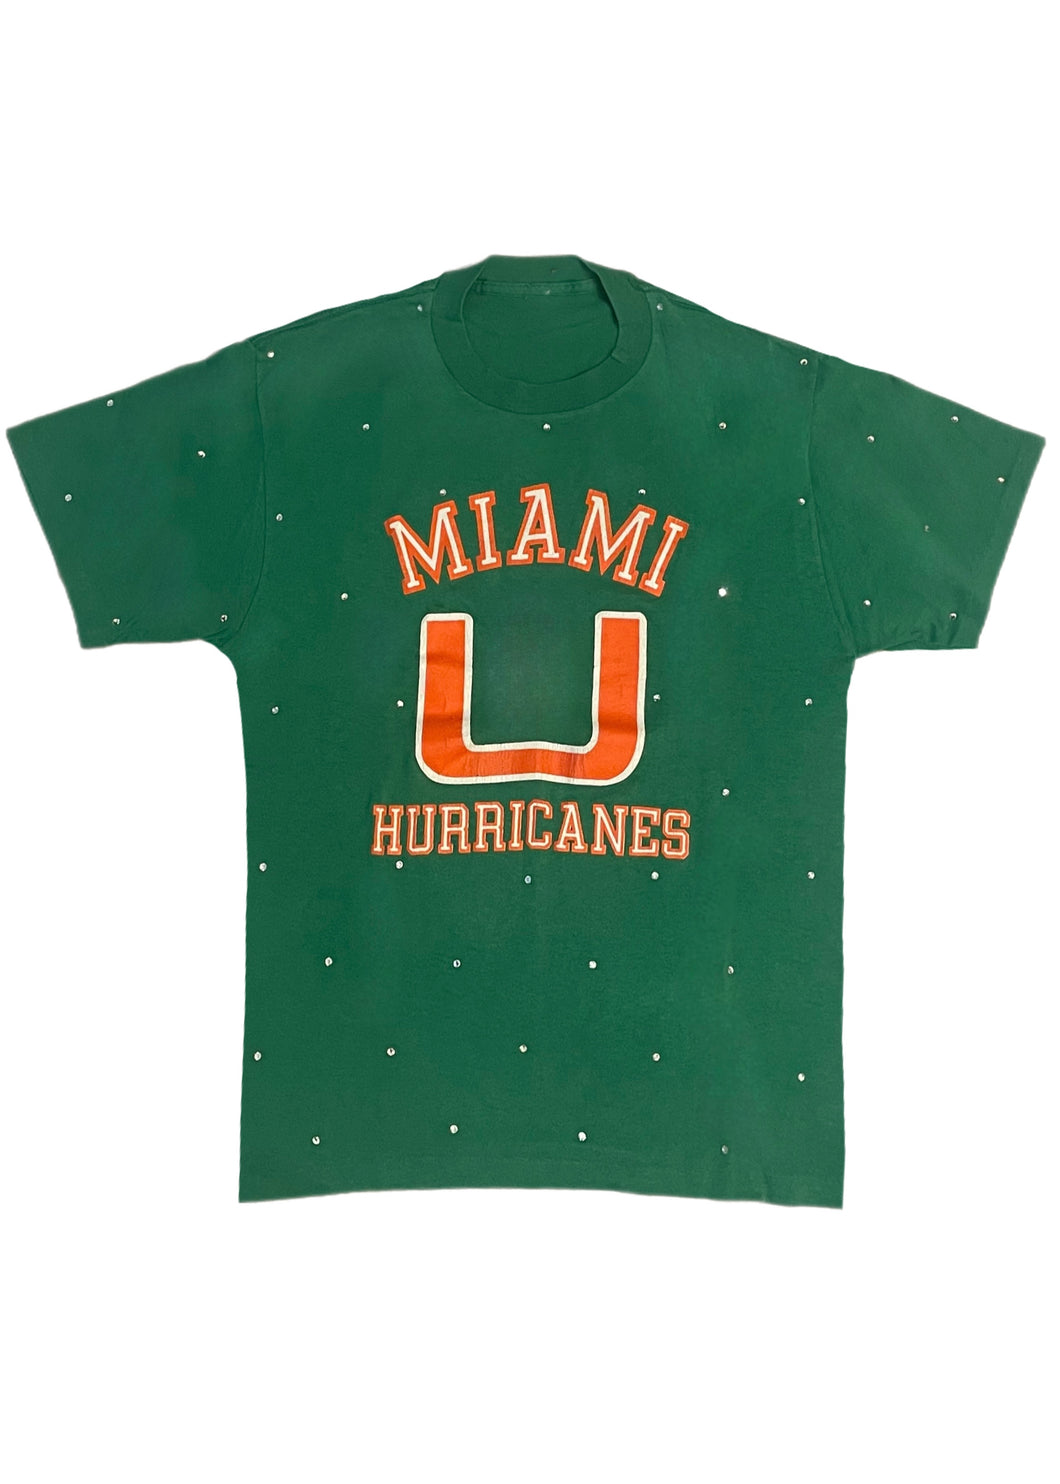 University of Miami, UM One of a KIND “Rare Find” Vintage Thin Tee Shirt with Overall Crystal Design